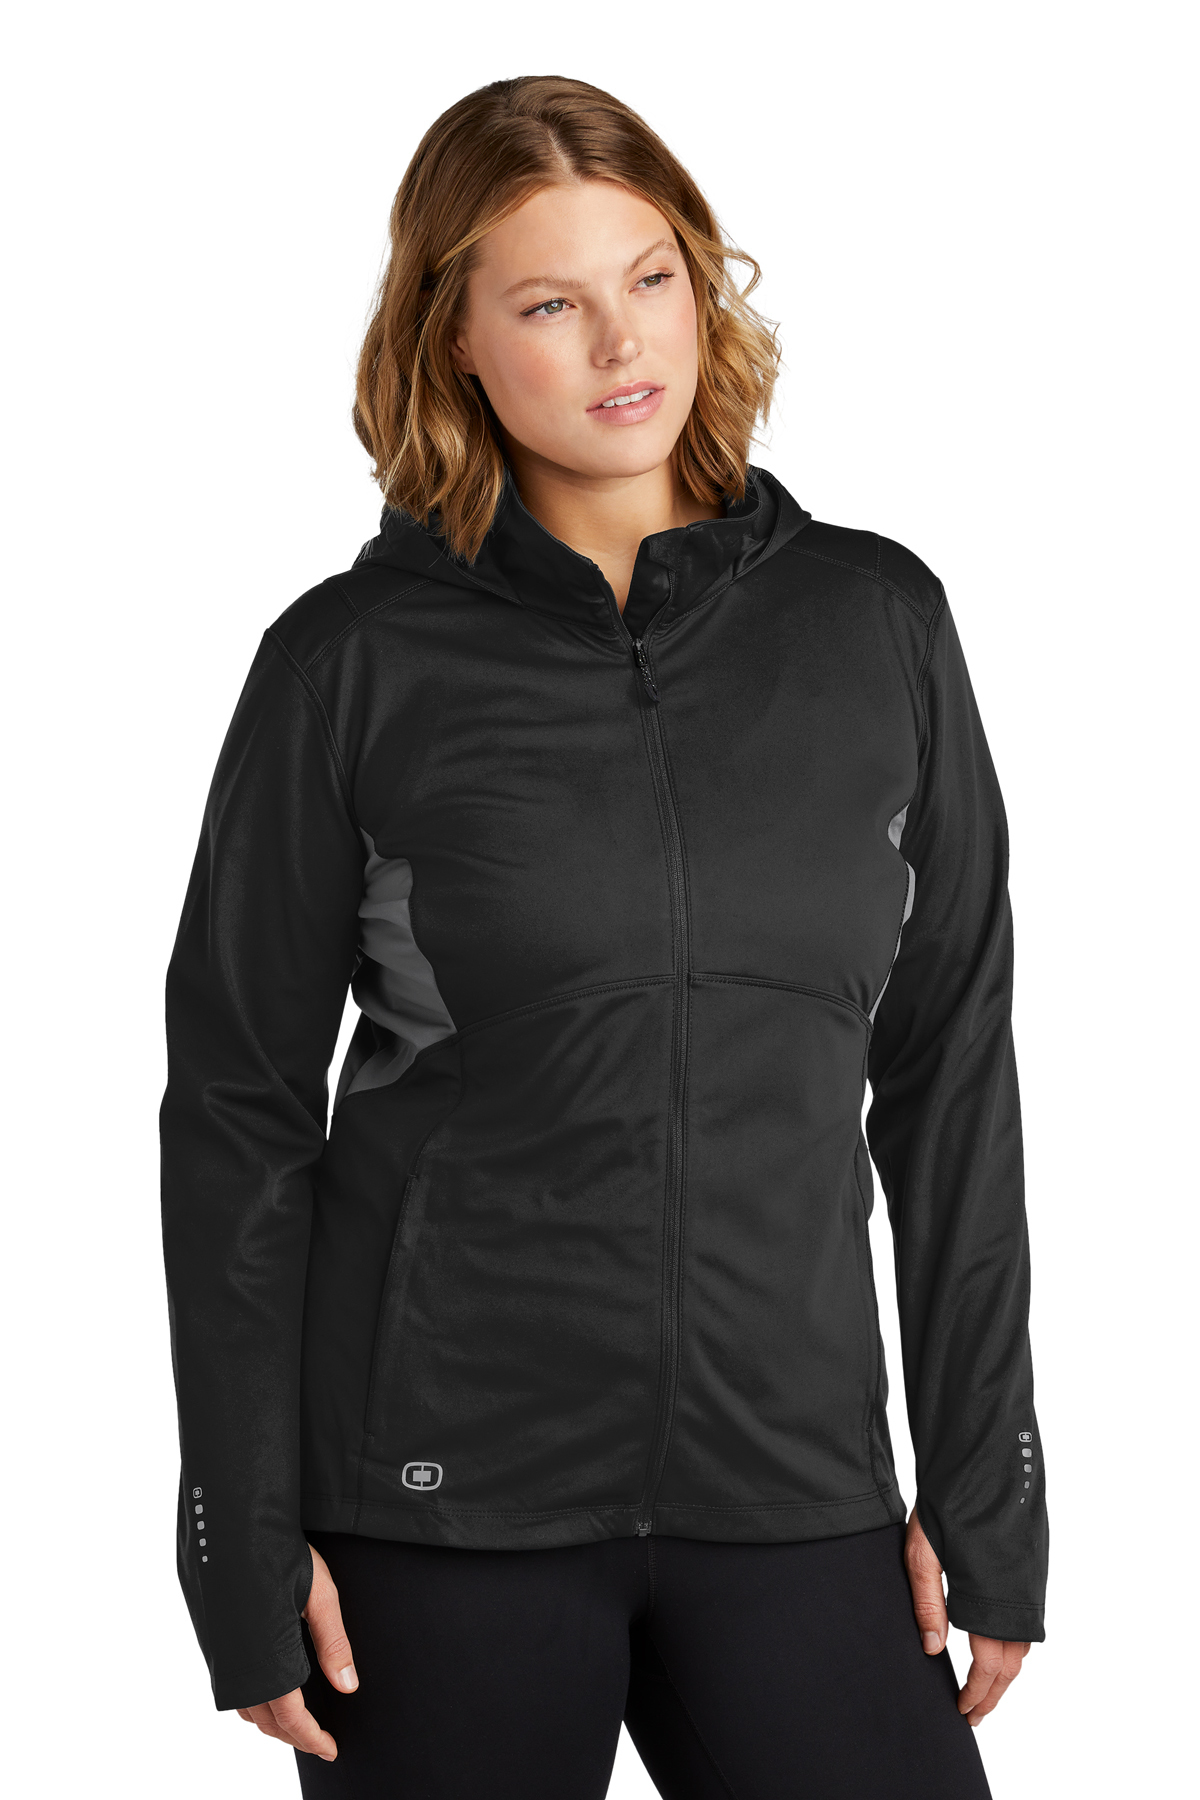 OGIO ® Ladies Pivot Soft Shell | Product | Company Casuals